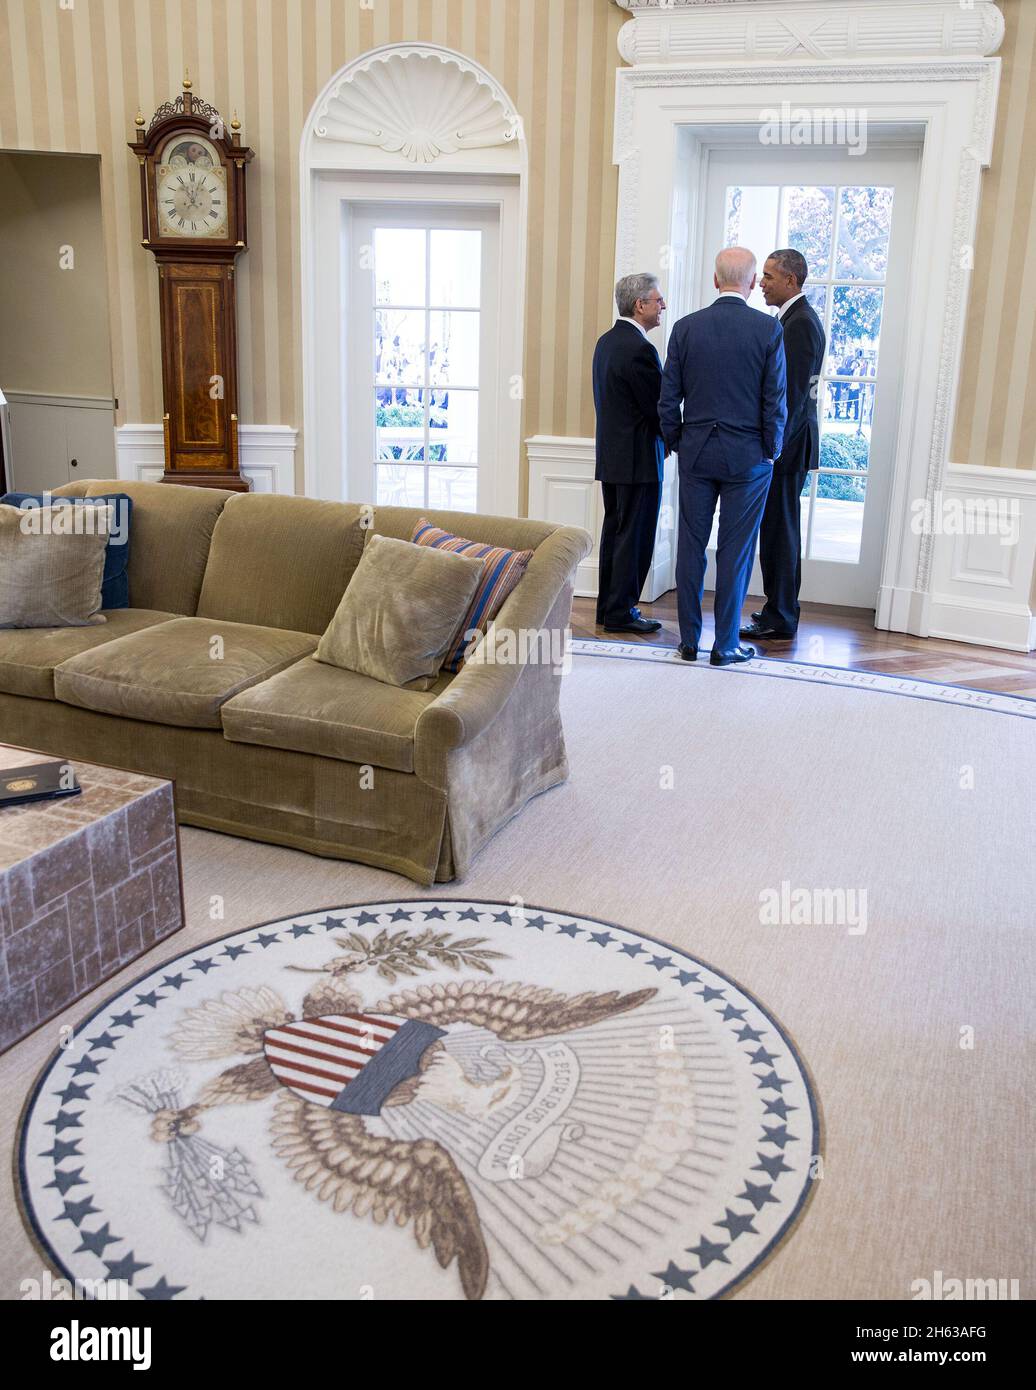 President Barack Obama and Vice President Joe Biden talk with Chief Judge Merrick B. Garland in the Oval Office, prior to a Rose Garden statement announcing Chief Judge Garland as the President's nominee to the United States Supreme Court, March 16, 2016. Stock Photo